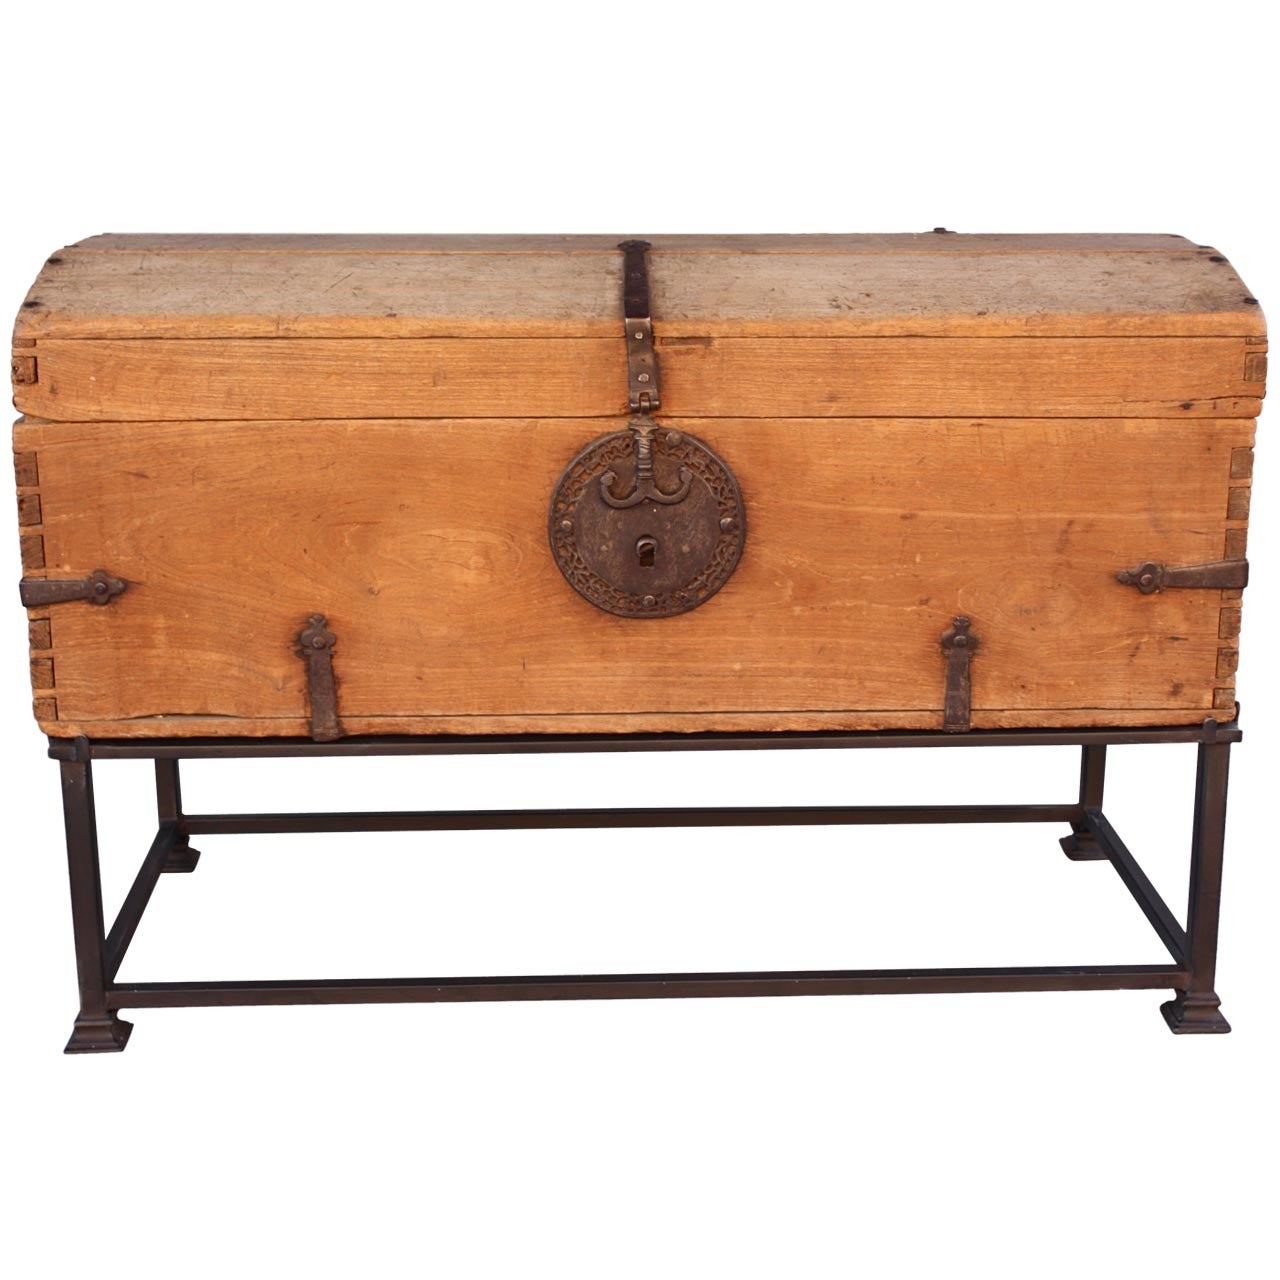 19th Century Mexican Trunk